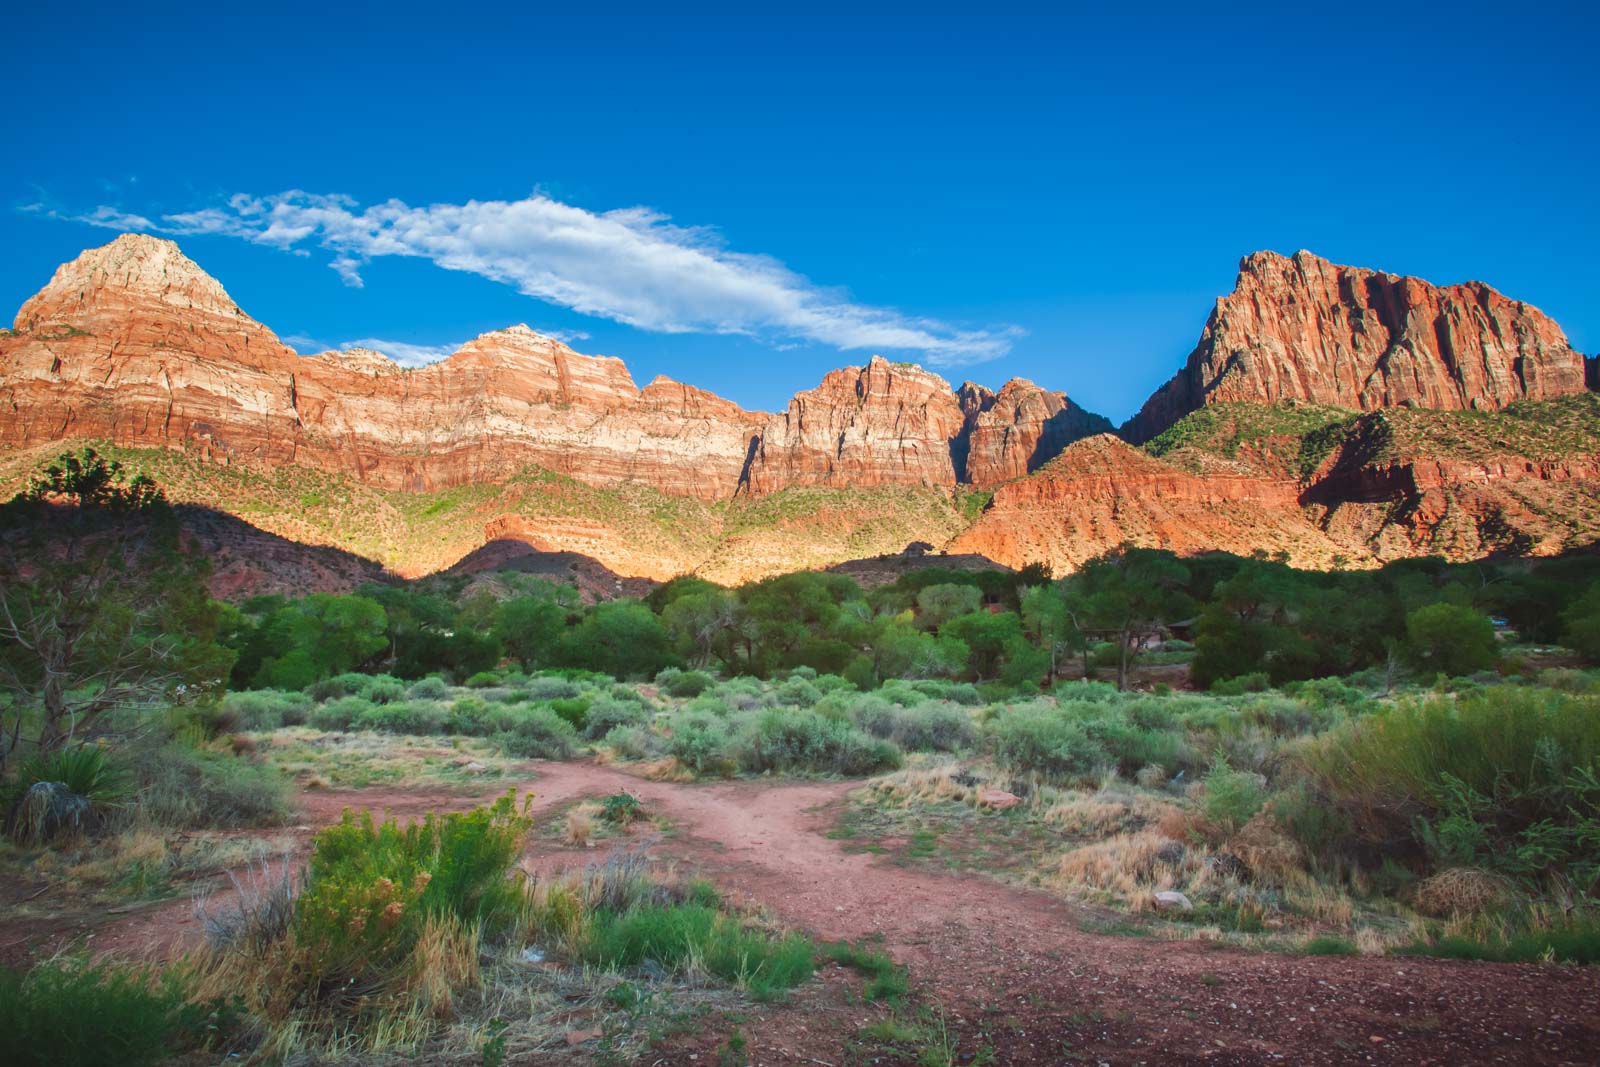 Where to Stay in Zion National Park – Your 2022 Guide